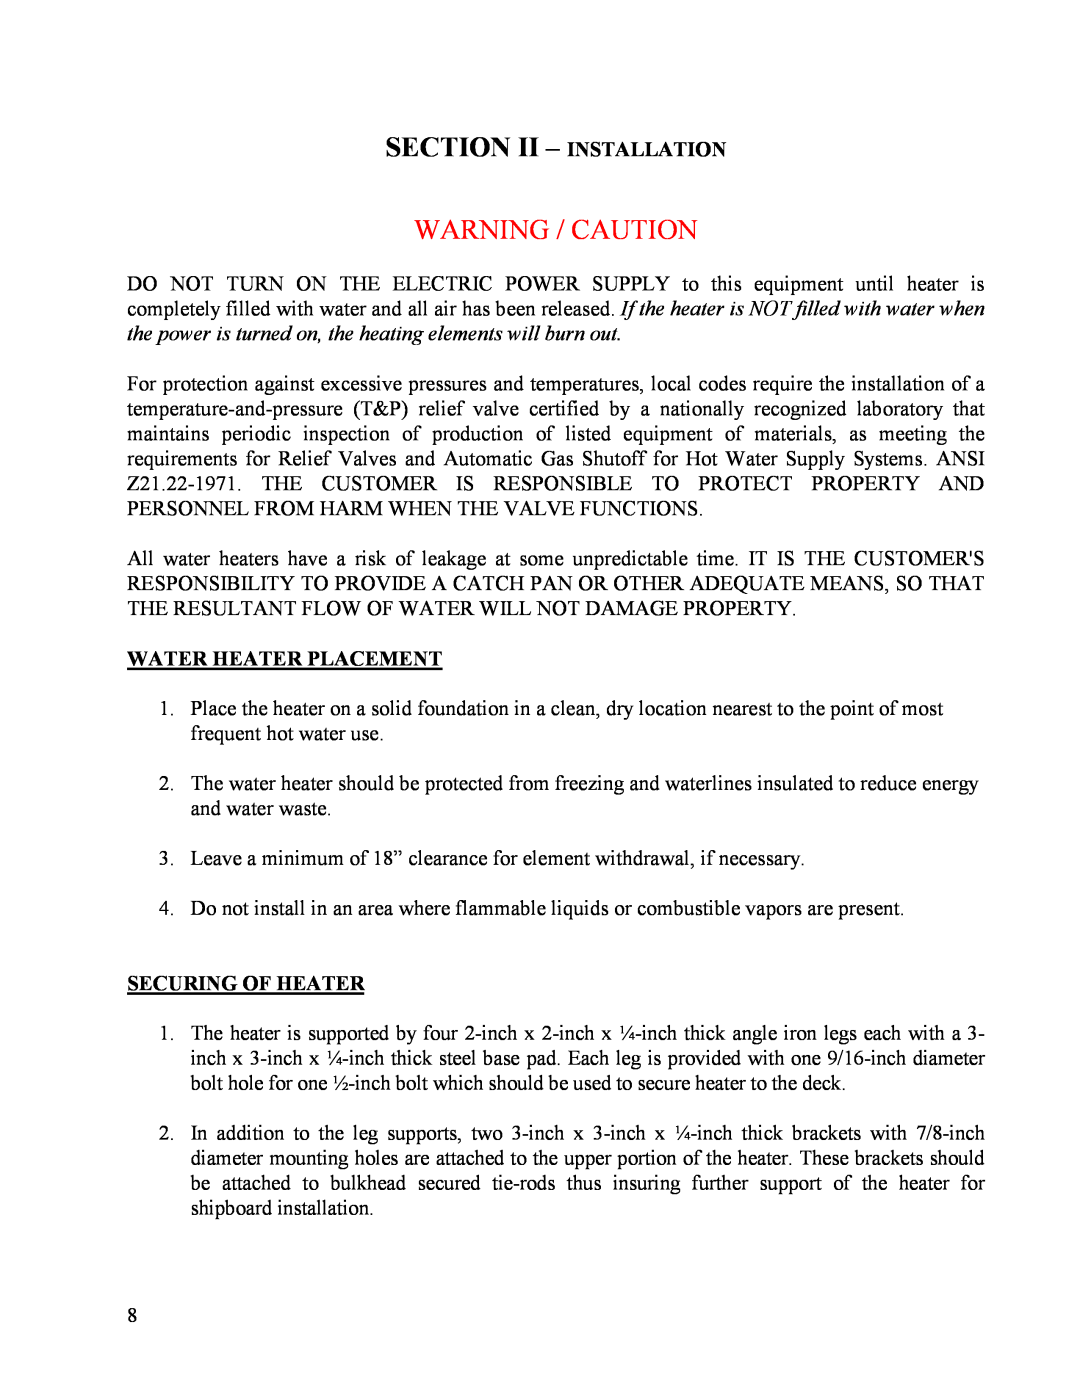 Hubbell Electric Heater Company ME manual Warning / Caution, Water Heater Placement, Securing Of Heater 